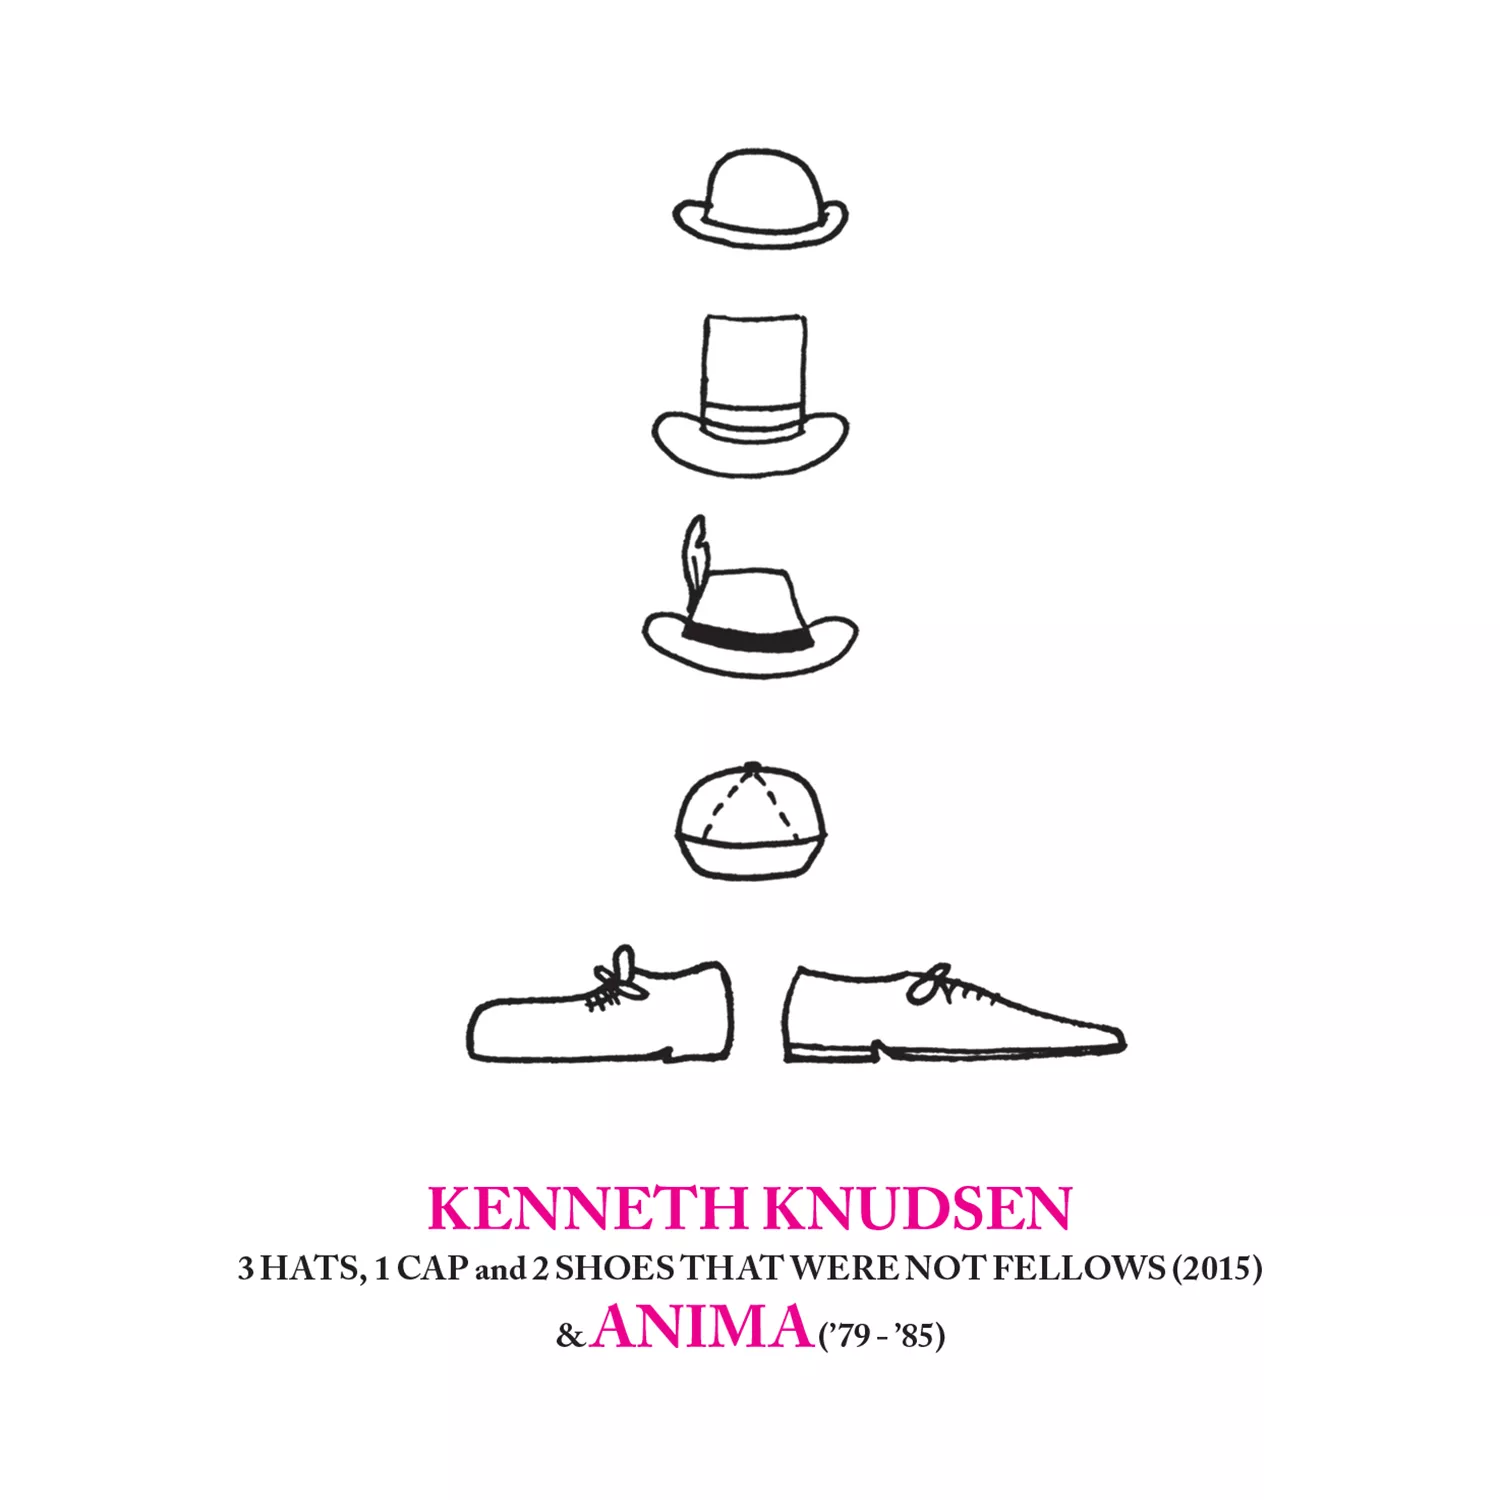 3 Hats, 1 Cap and 2 Shoes That Were Not Fellows & Anima - Kenneth Knudsen